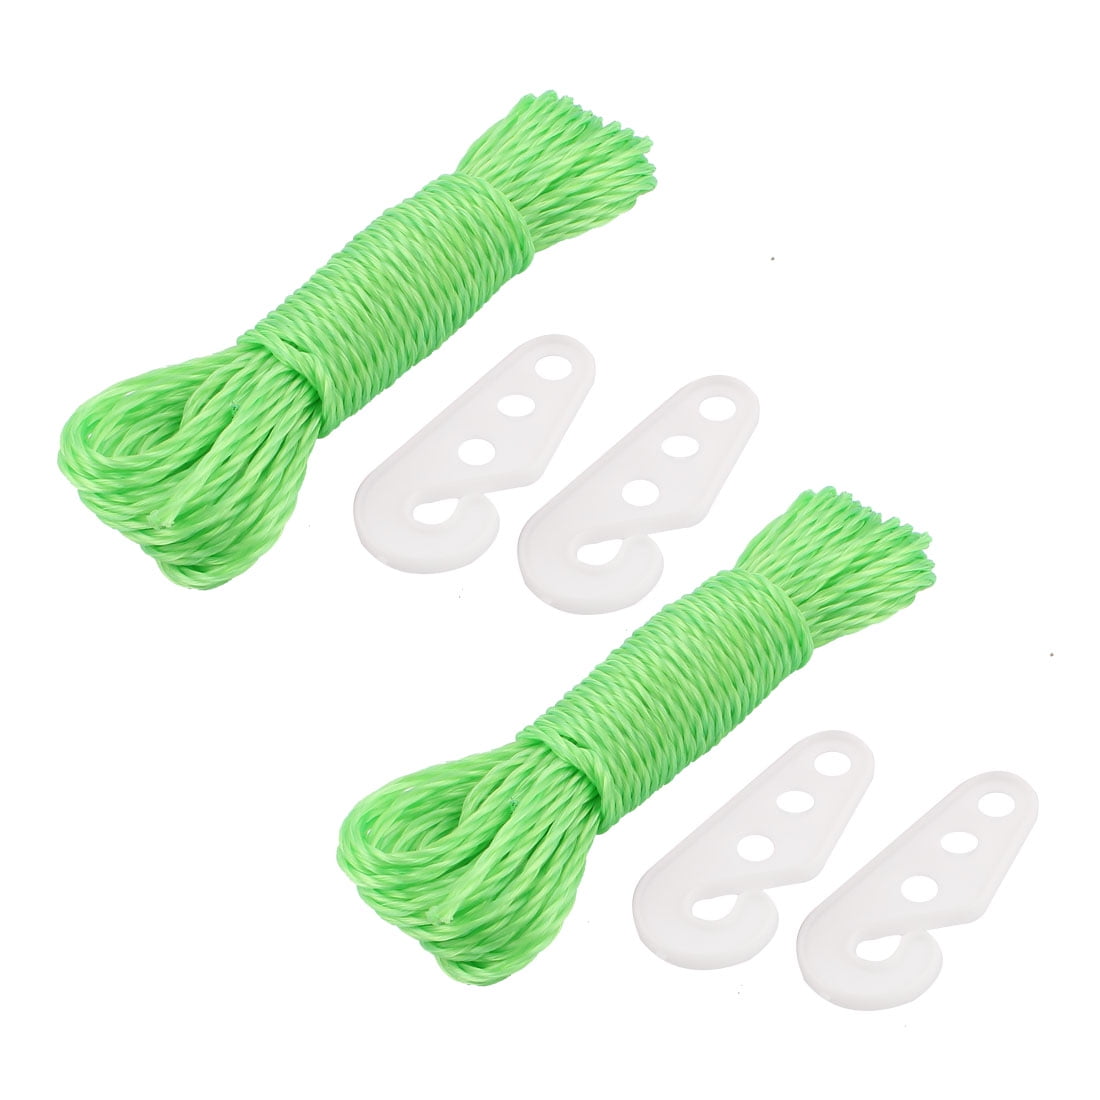 Camping Outdoor Laundry Nylon Clothesline Clothes Towels Hanging Line Rope  String w Hooks 33Ft Green 2pcs 